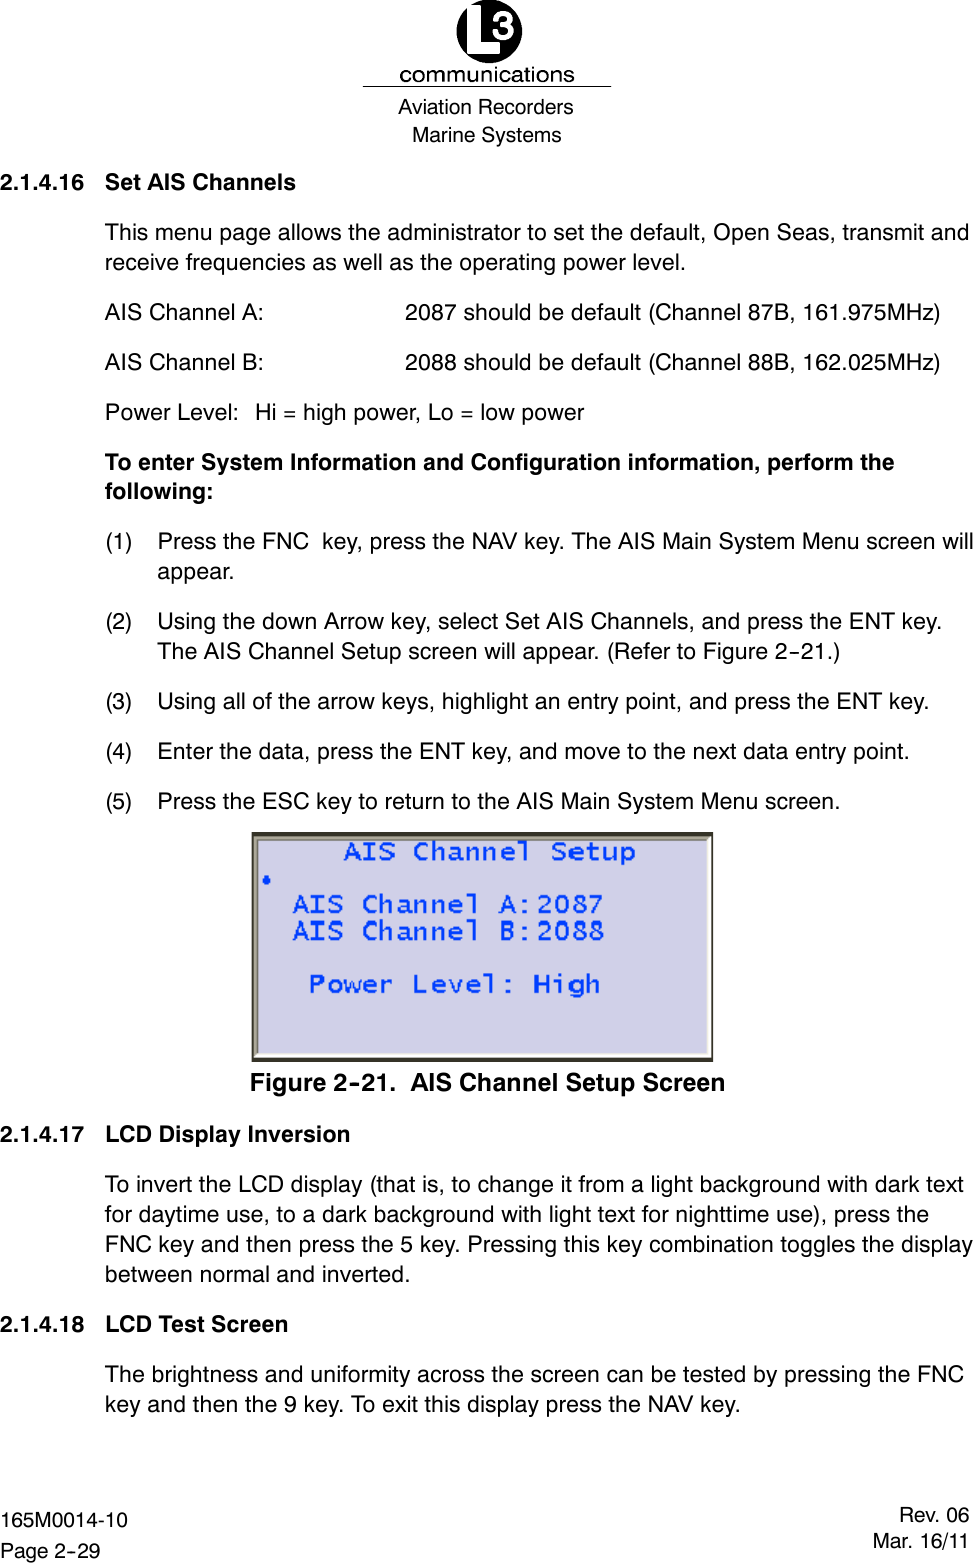 Marine SystemsAviation RecordersRev. 06Mar. 16/11165M0014-10Page 2--292.1.4.16 Set AIS ChannelsThis menu page allows the administrator to set the default, Open Seas, transmit andreceive frequencies as well as the operating power level.AIS Channel A: 2087 should be default (Channel 87B, 161.975MHz)AIS Channel B: 2088 should be default (Channel 88B, 162.025MHz)Power Level: Hi = high power, Lo = low powerTo enter System Information and Configuration information, perform thefollowing:(1) Press the FNC key, press the NAV key. The AIS Main System Menu screen willappear.(2) Using the down Arrow key, select Set AIS Channels, and press the ENT key.The AIS Channel Setup screen will appear. (Refer to Figure 2--21.)(3) Using all of the arrow keys, highlight an entry point, and press the ENT key.(4) Enter the data, press the ENT key, and move to the next data entry point.(5) Press the ESC key to return to the AIS Main System Menu screen.Figure 2--21. AIS Channel Setup Screen2.1.4.17 LCD Display InversionTo invert the LCD display (that is, to change it from a light background with dark textfor daytime use, to a dark background with light text for nighttime use), press theFNC key and then press the 5 key. Pressing this key combination toggles the displaybetween normal and inverted.2.1.4.18 LCD Test ScreenThe brightness and uniformity across the screen can be tested by pressing the FNCkey and then the 9 key. To exit this display press the NAV key.